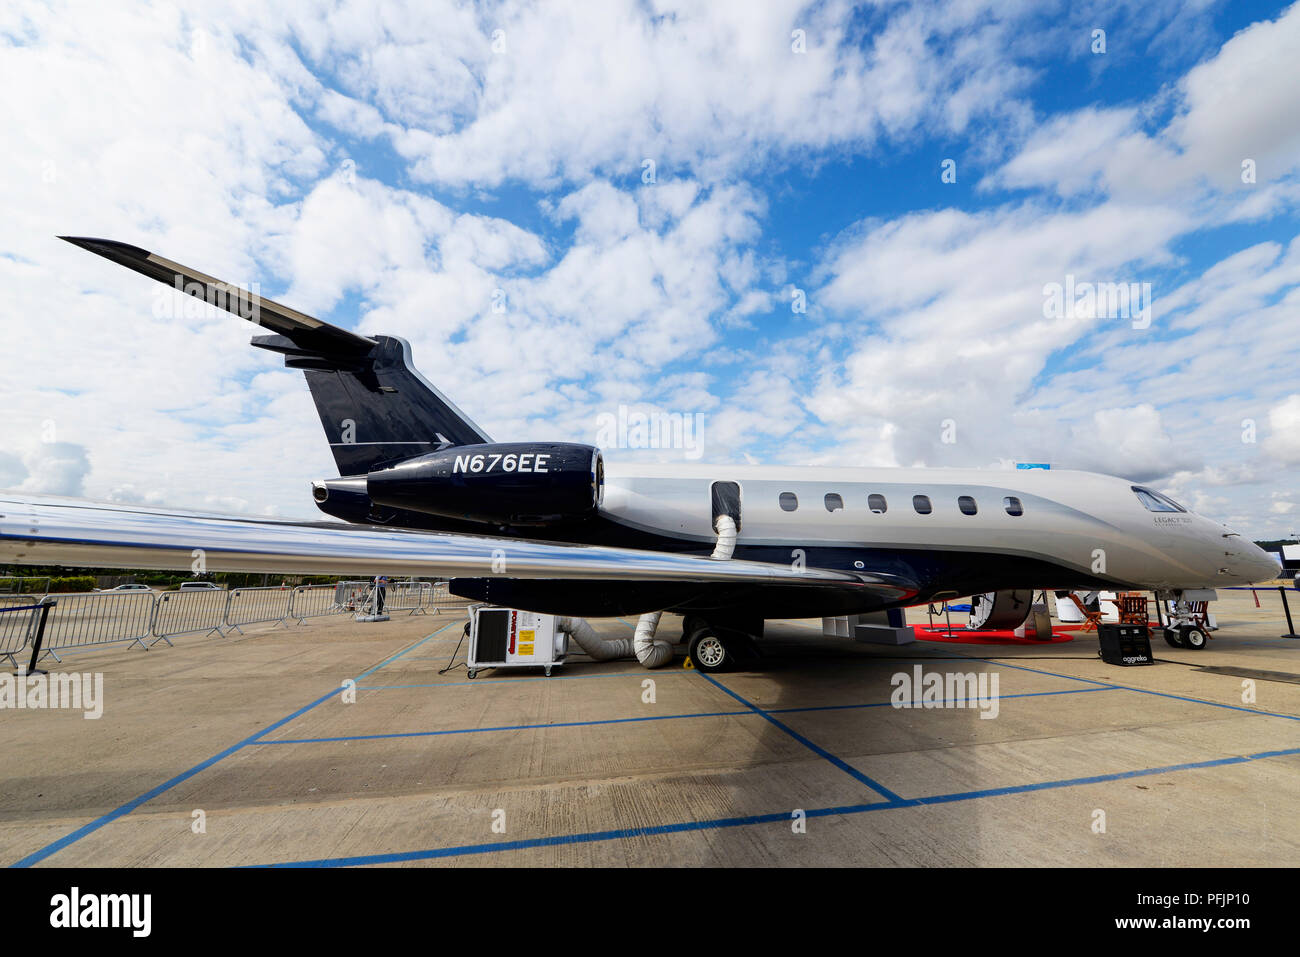 Embraer Legacy 500 at the Farnborough International Airshow FIA, aviation, aerospace trade show. Business jet. Corporate jet plane. Space for copy Stock Photo